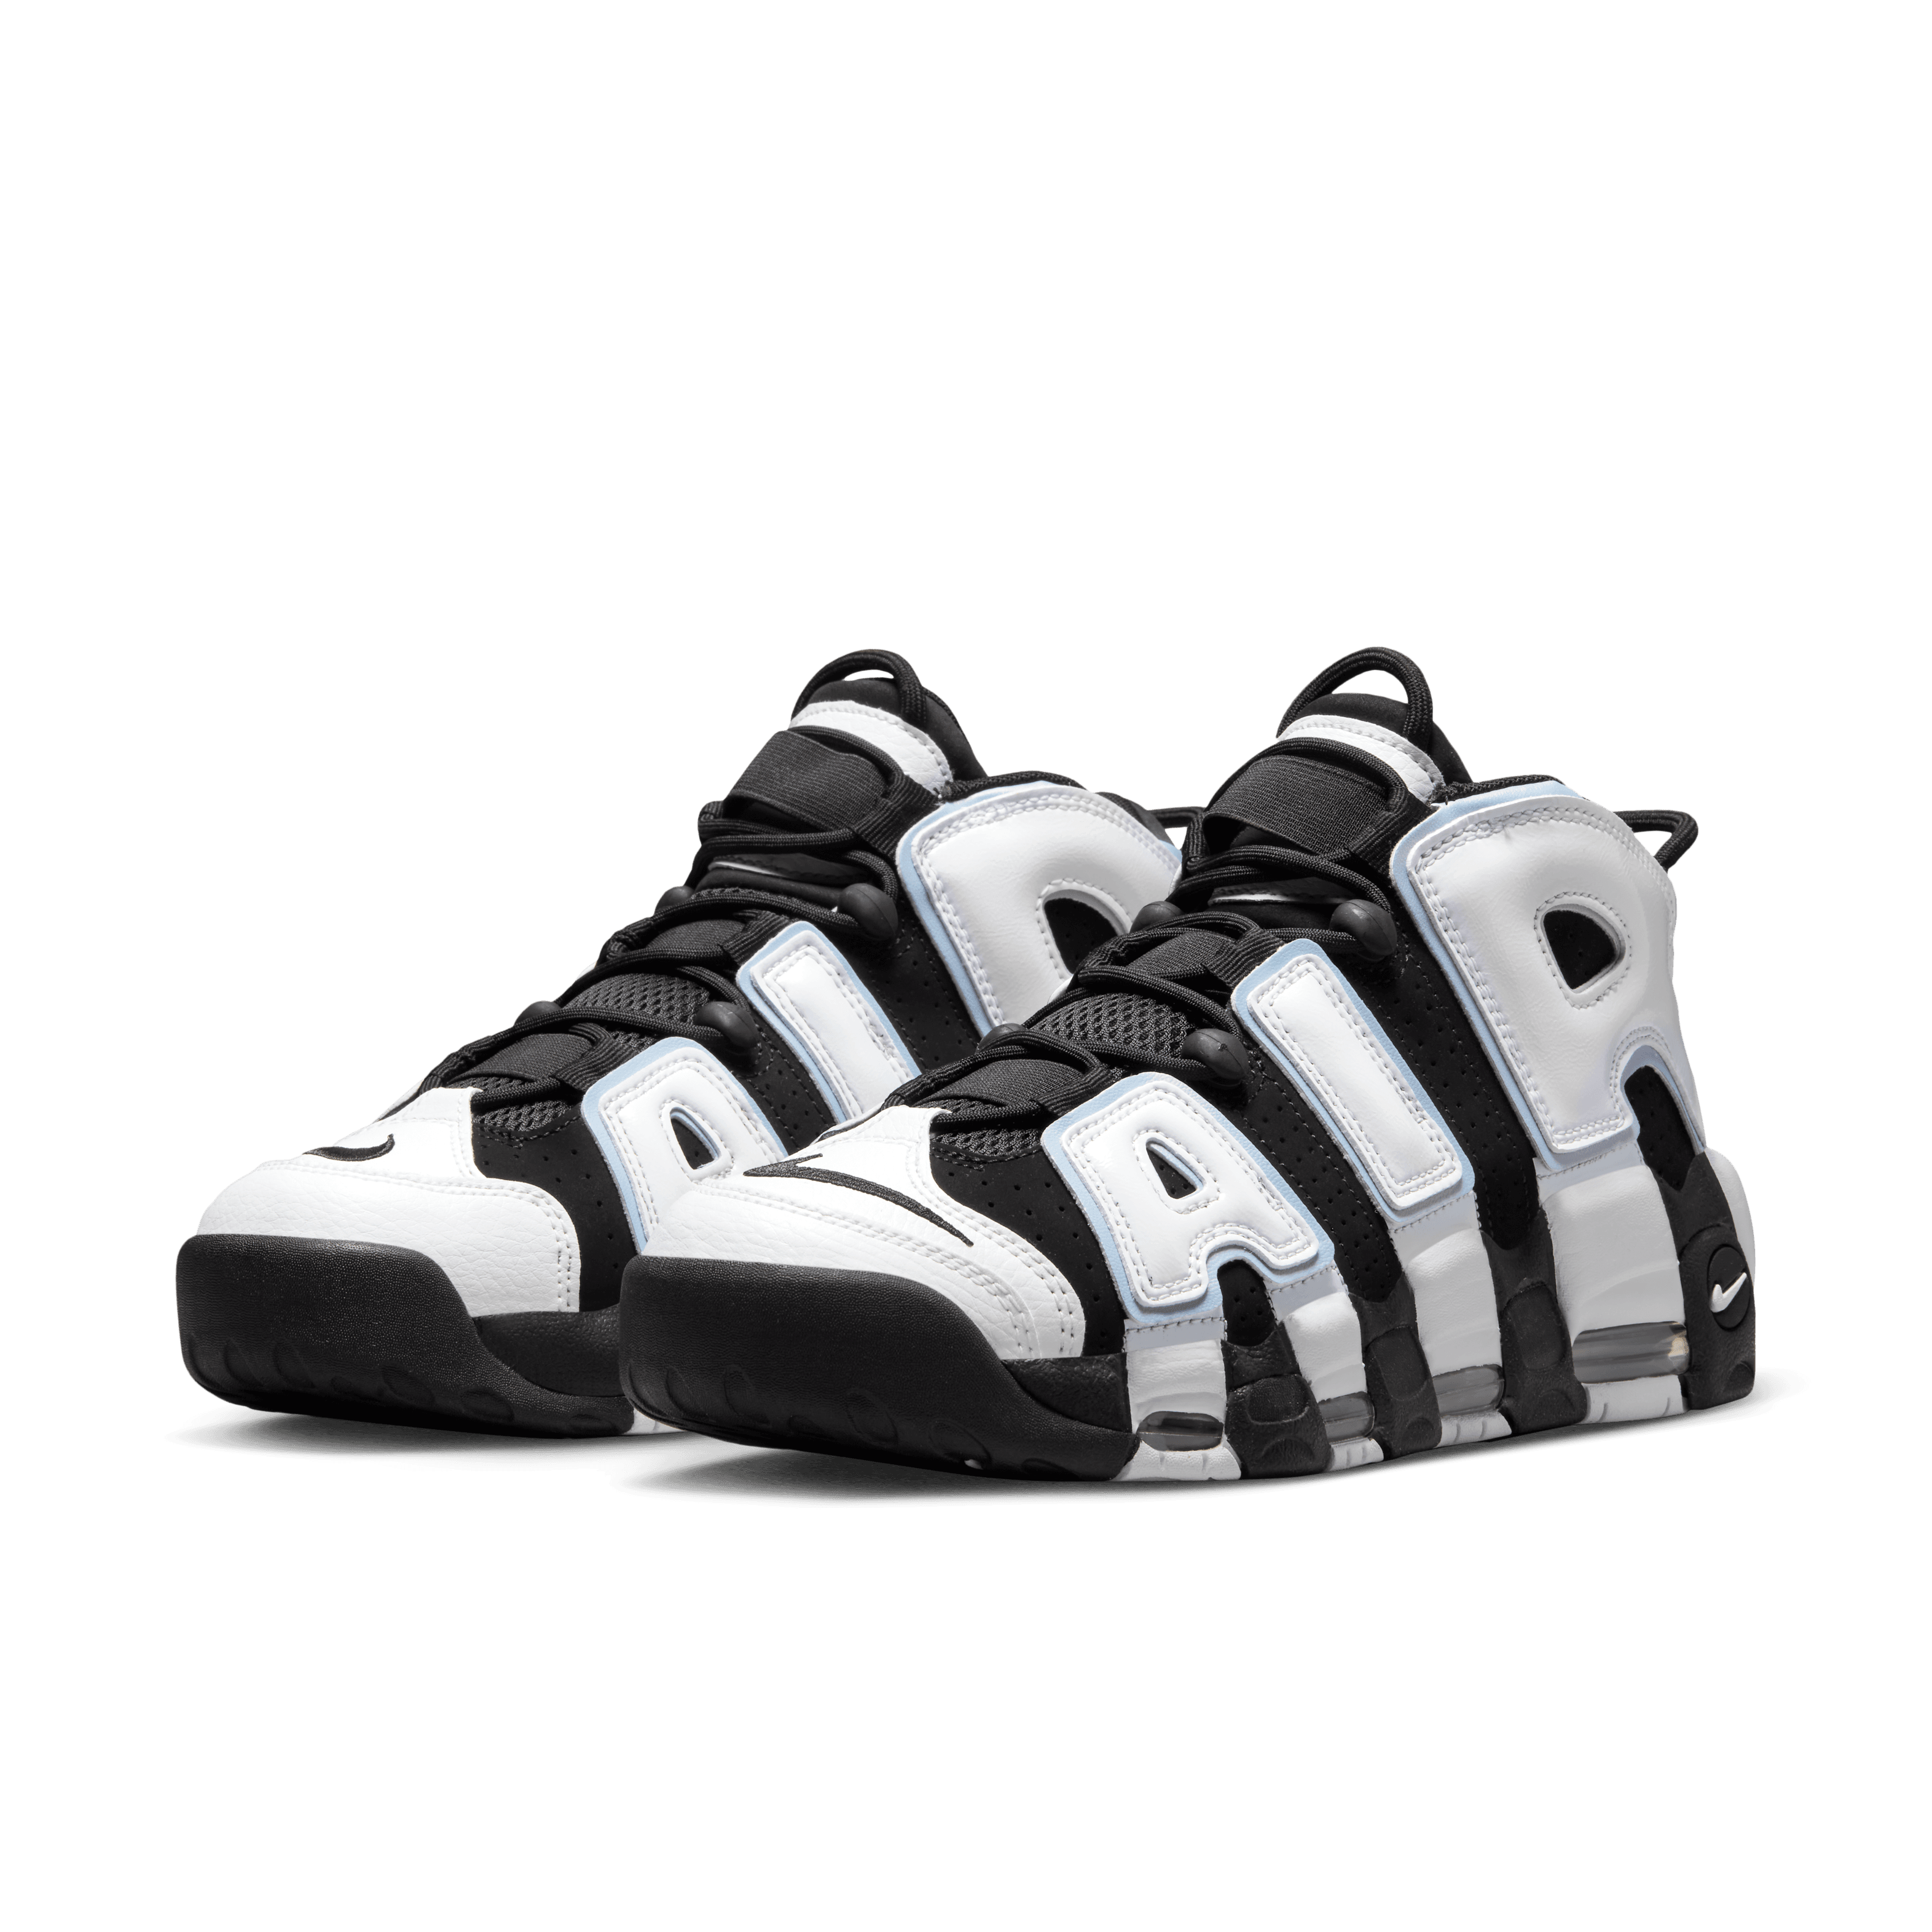 Nike Air More Uptempo '96, Releasing 2/17/23 - Nohble